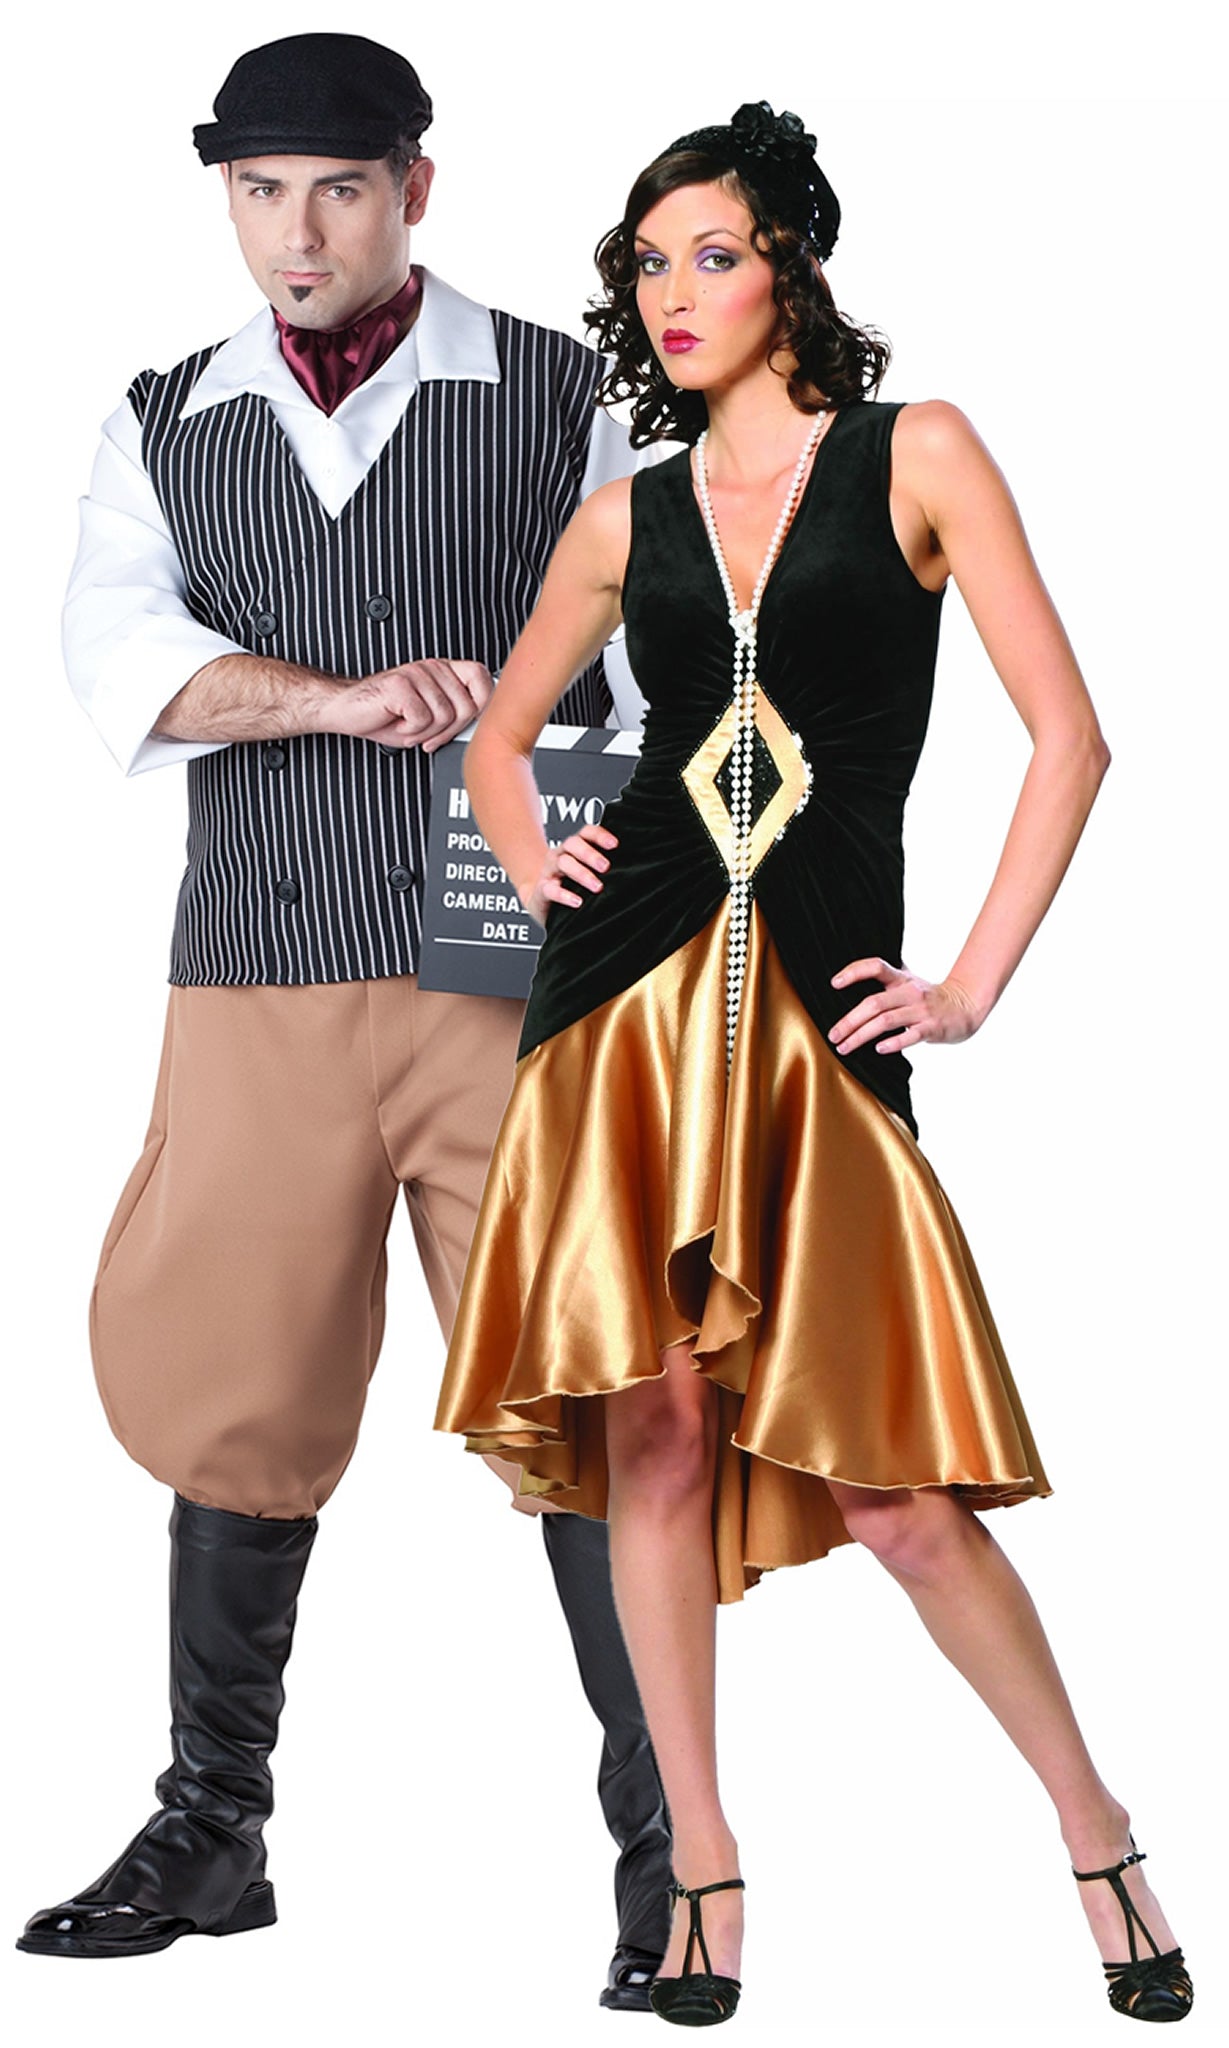 Gold and black 1920s flapper dress with hat next to director